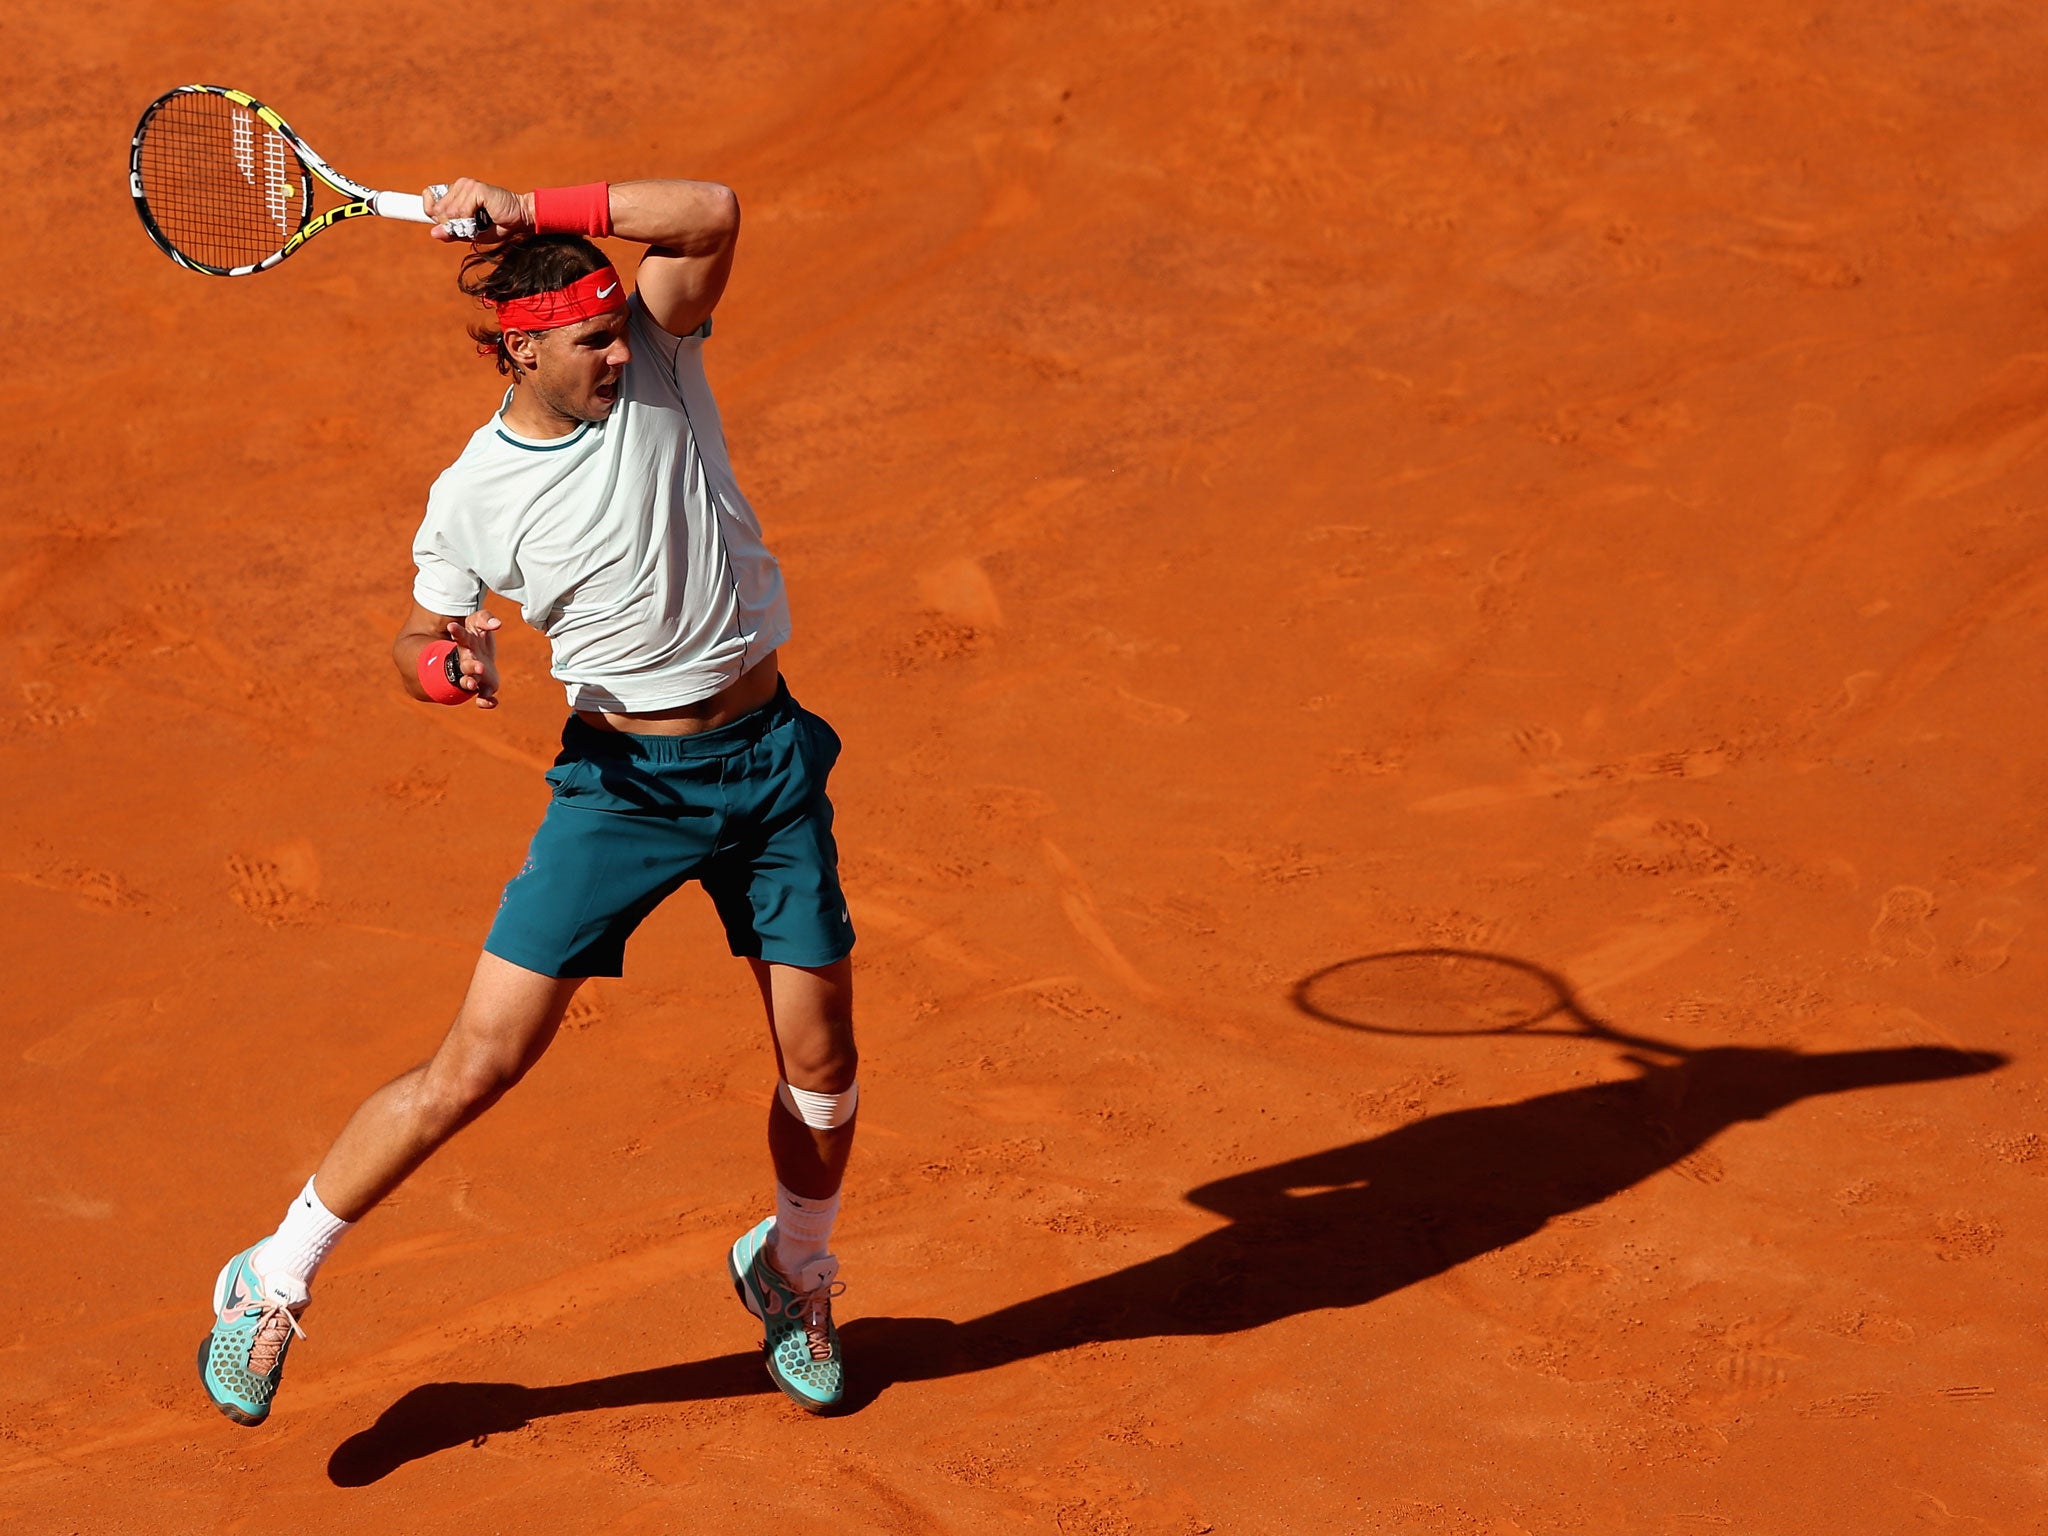 Rafael Nadal: 'Poker is like tennis. You can’t play crazy because you’ll make mistakes'